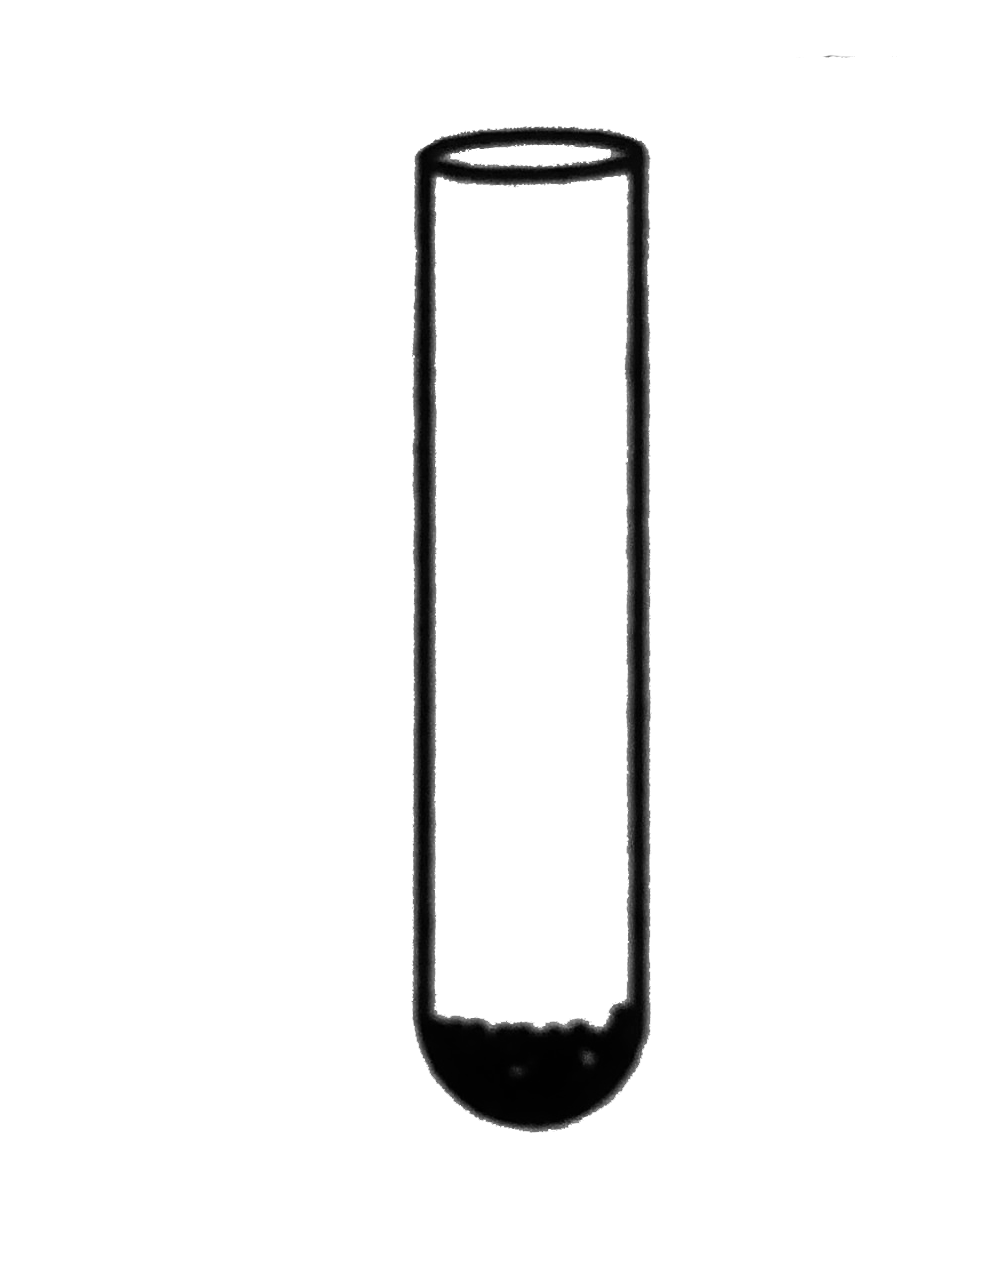 A glass tube of radius 0.8 cm floats vertical in water, as shown in figure. What mass of lead pellets would cause the tube to sink a further3 cm?